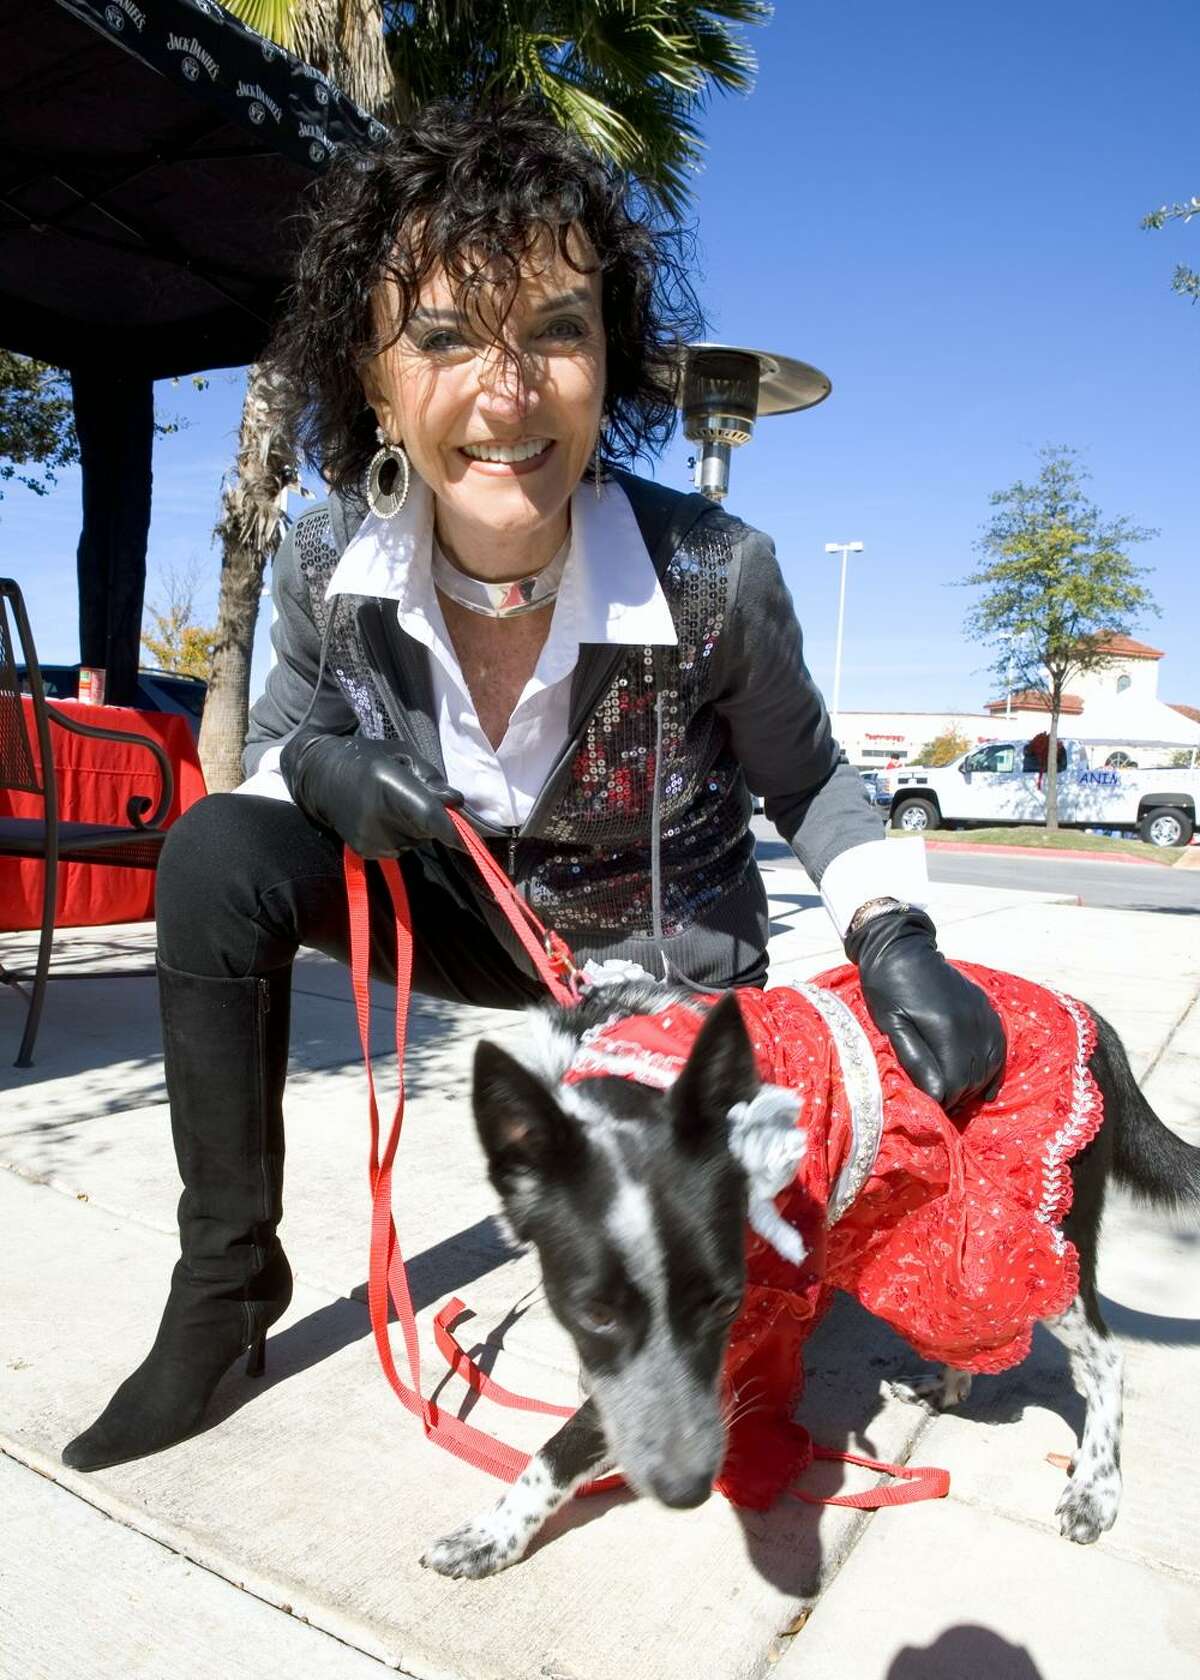 Donna Muslin gets ready to walk the red carpet with Sarah at the Animal Friends' Red Carpet Holiday Event in December 2009.